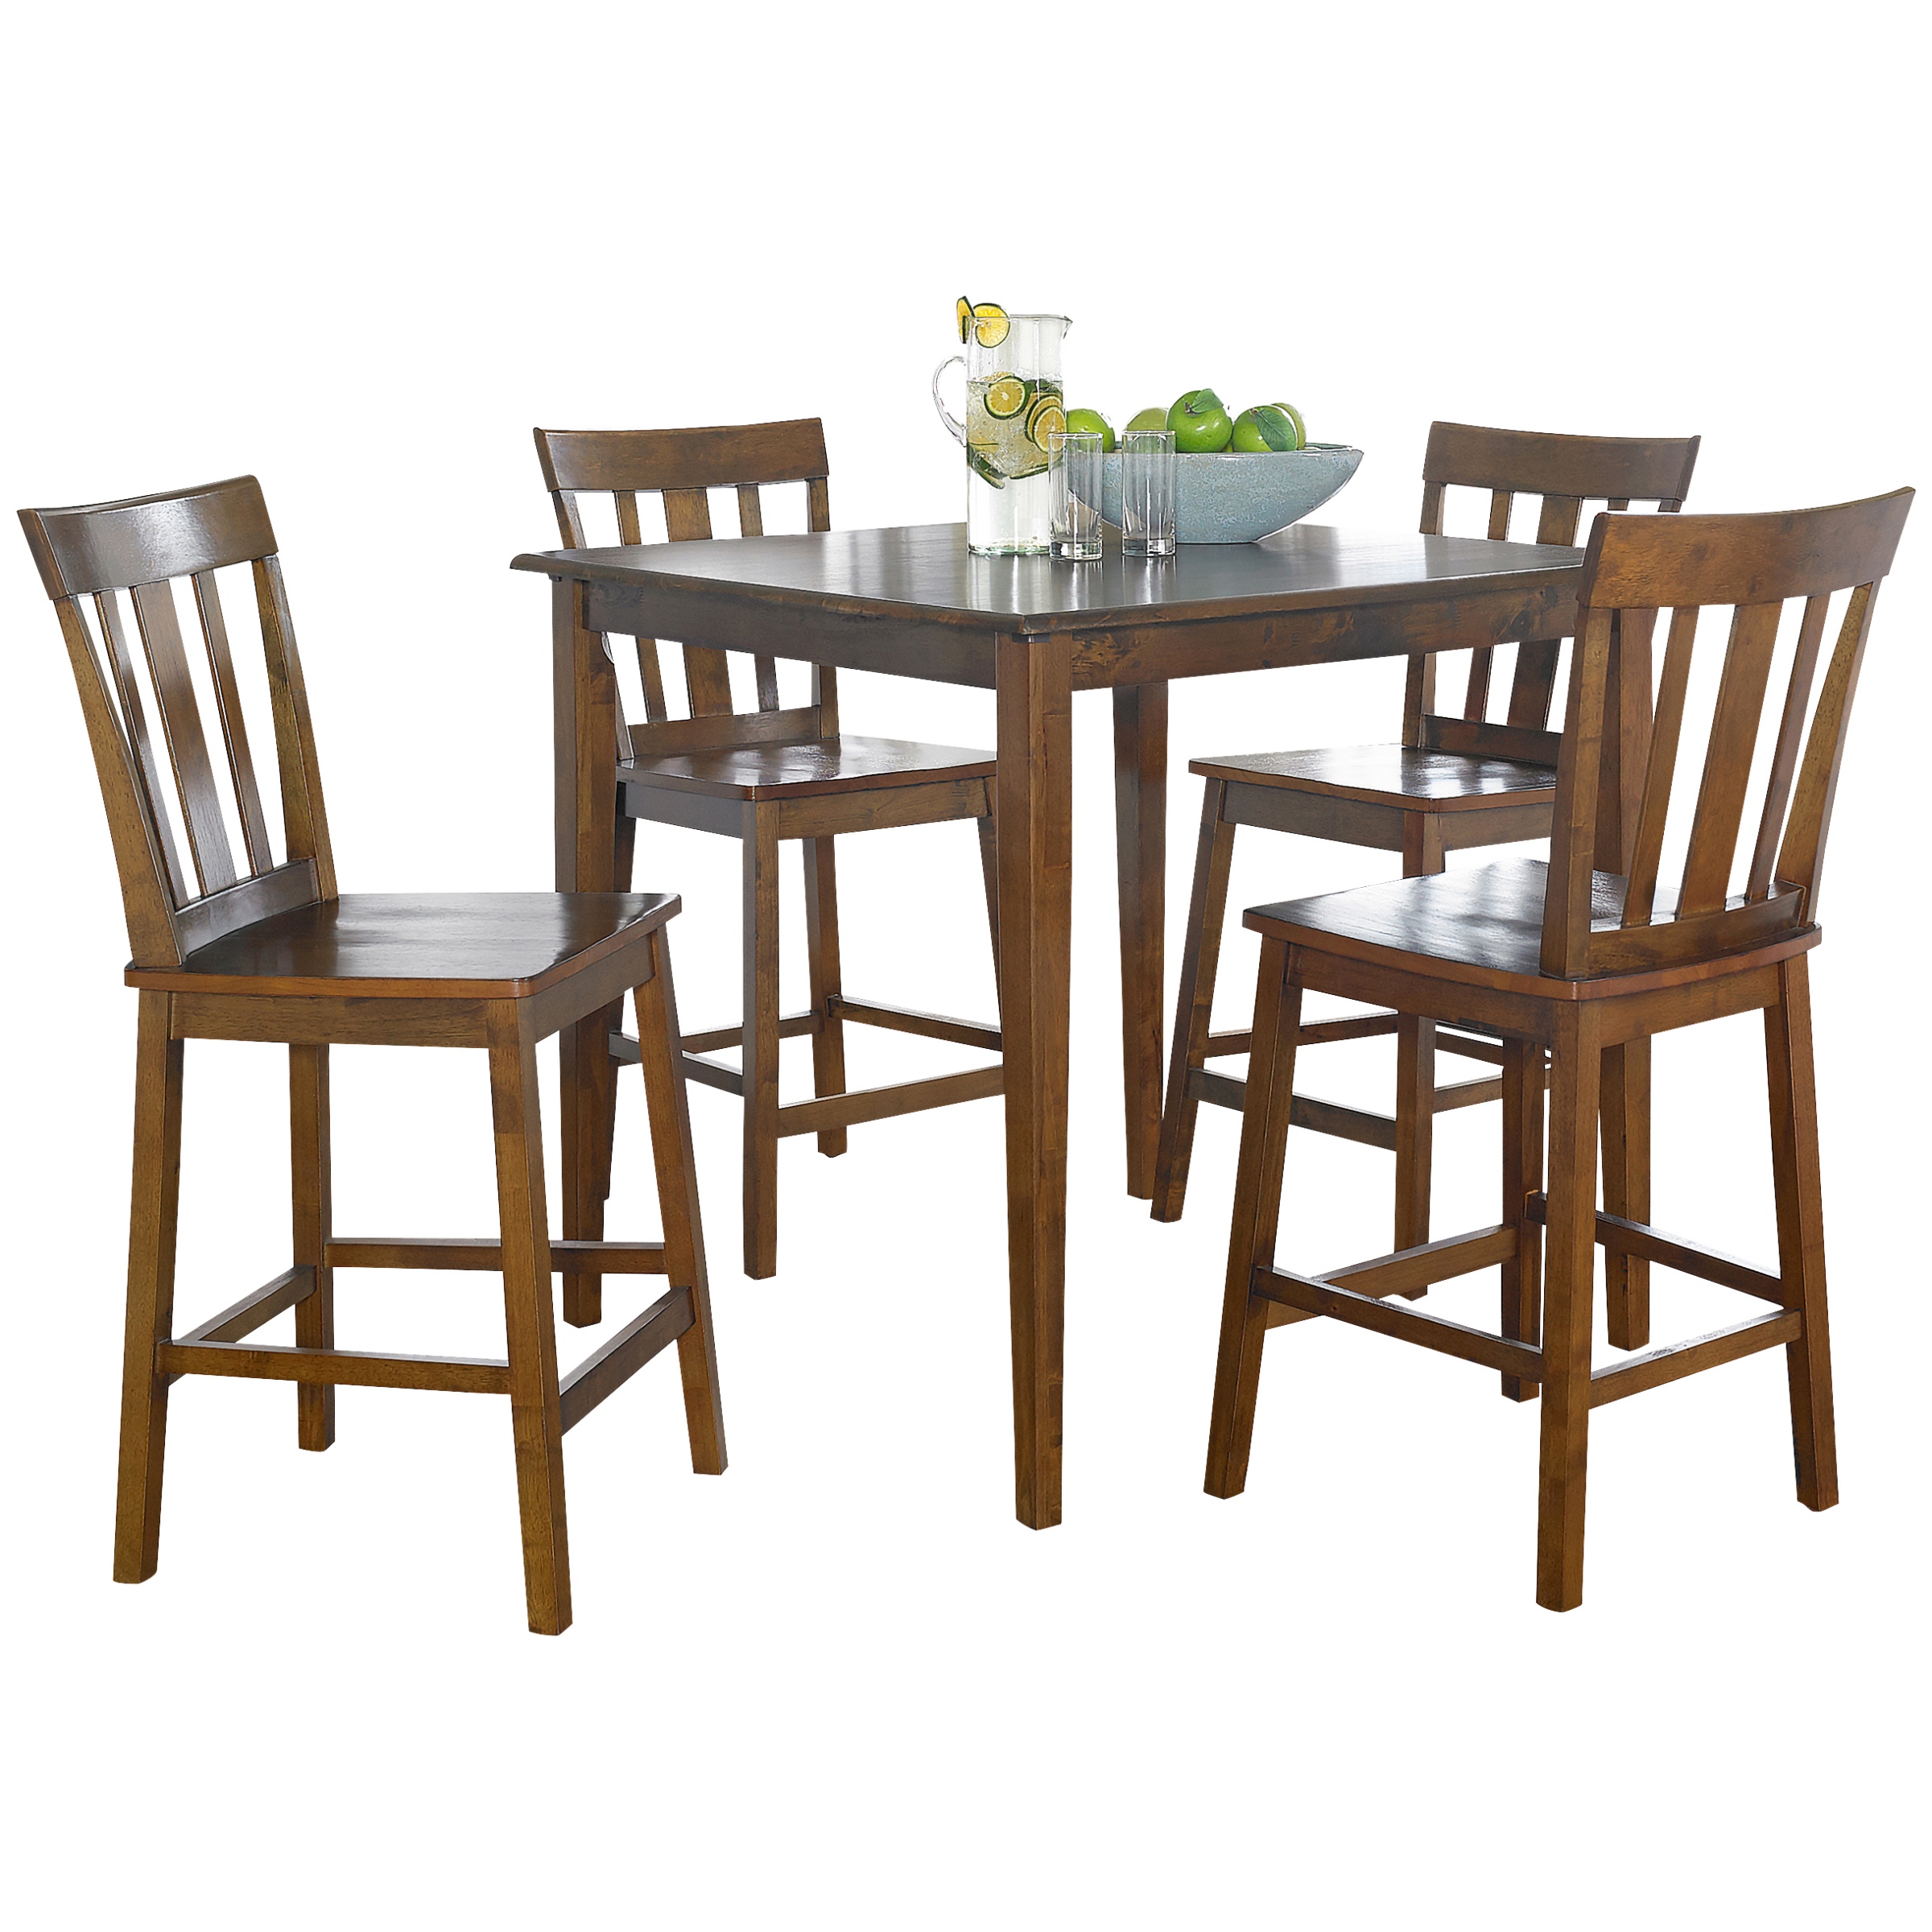 Mainstays 5 Piece Mission Counter Height Dining Set, Solid Wood, Cherry Color for Home - image 2 of 8